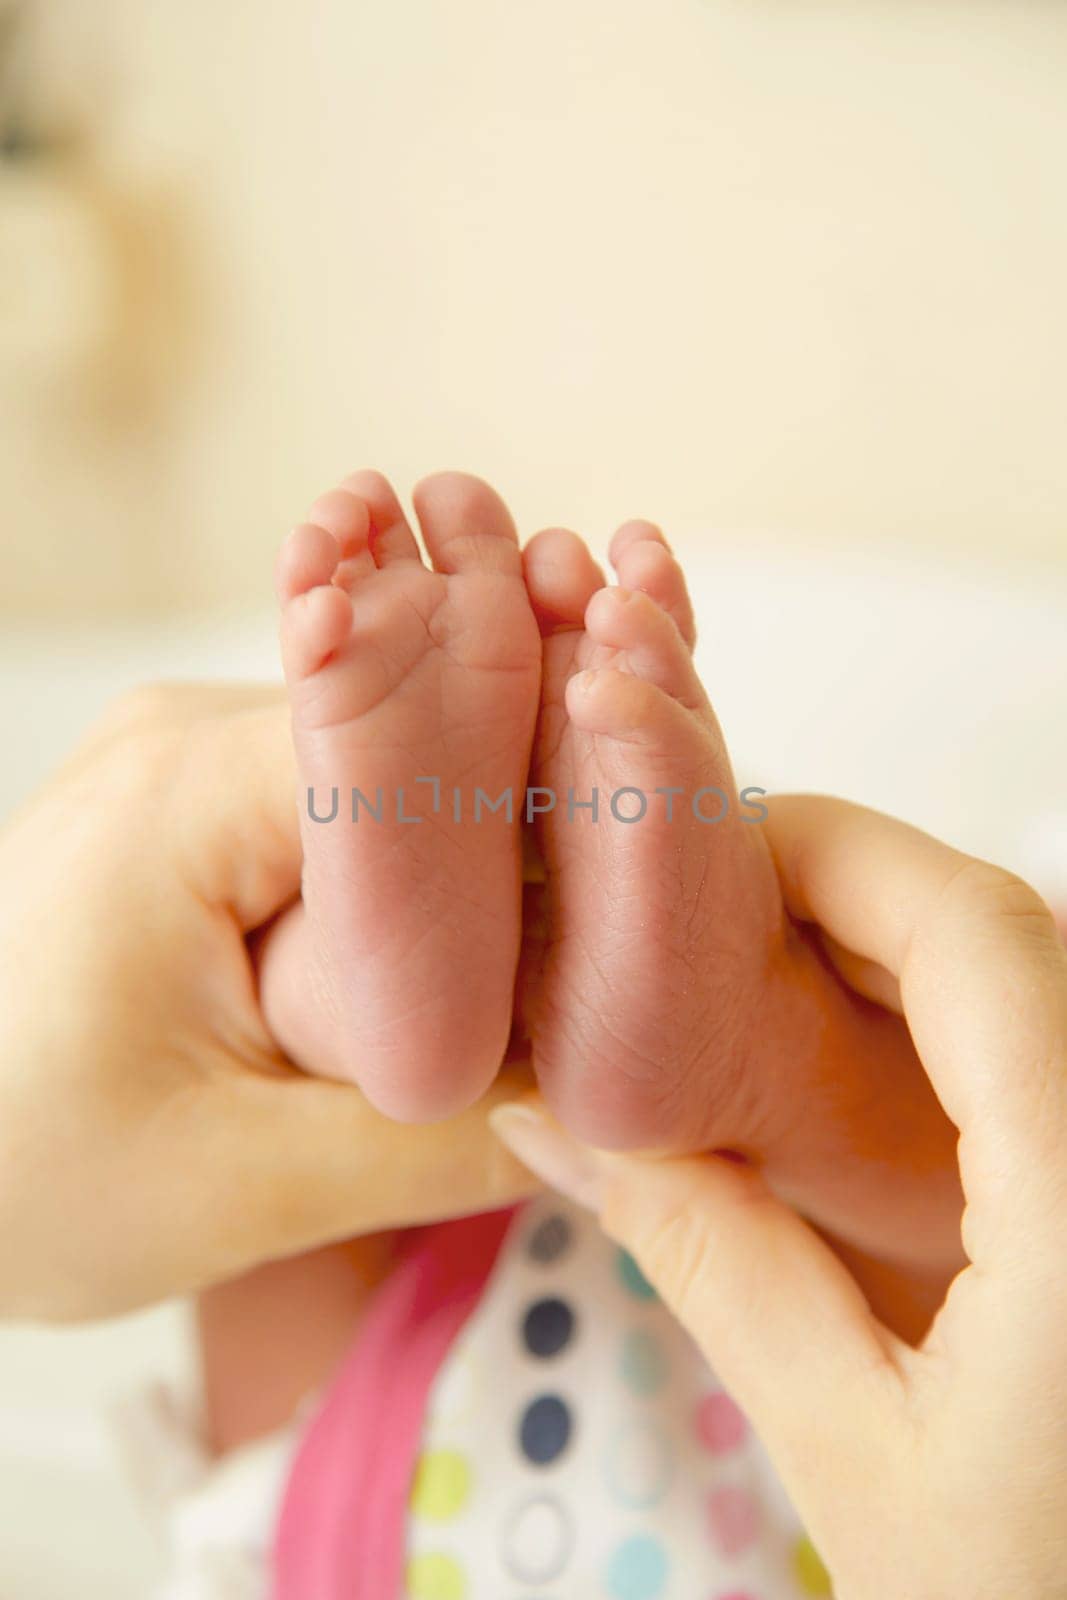 Small legs of a newborn in close-up by Mastak80